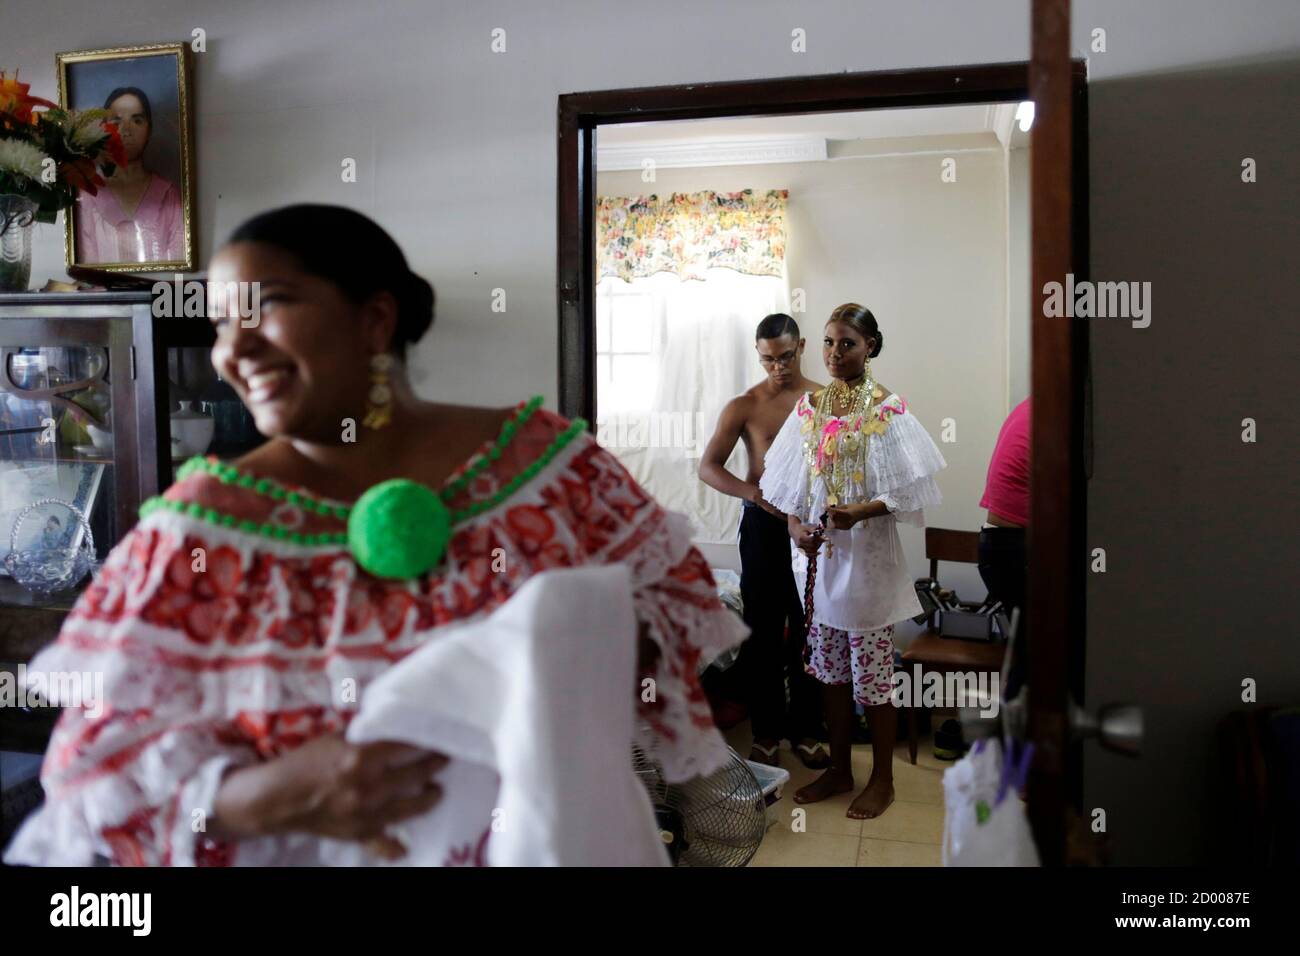 Women wearing traditional clothing known as "Pollera" get ready to take  part in the annual Thousand Polleras parade in Las Tablas, in the province  of Los Santos January 10, 2015. According to